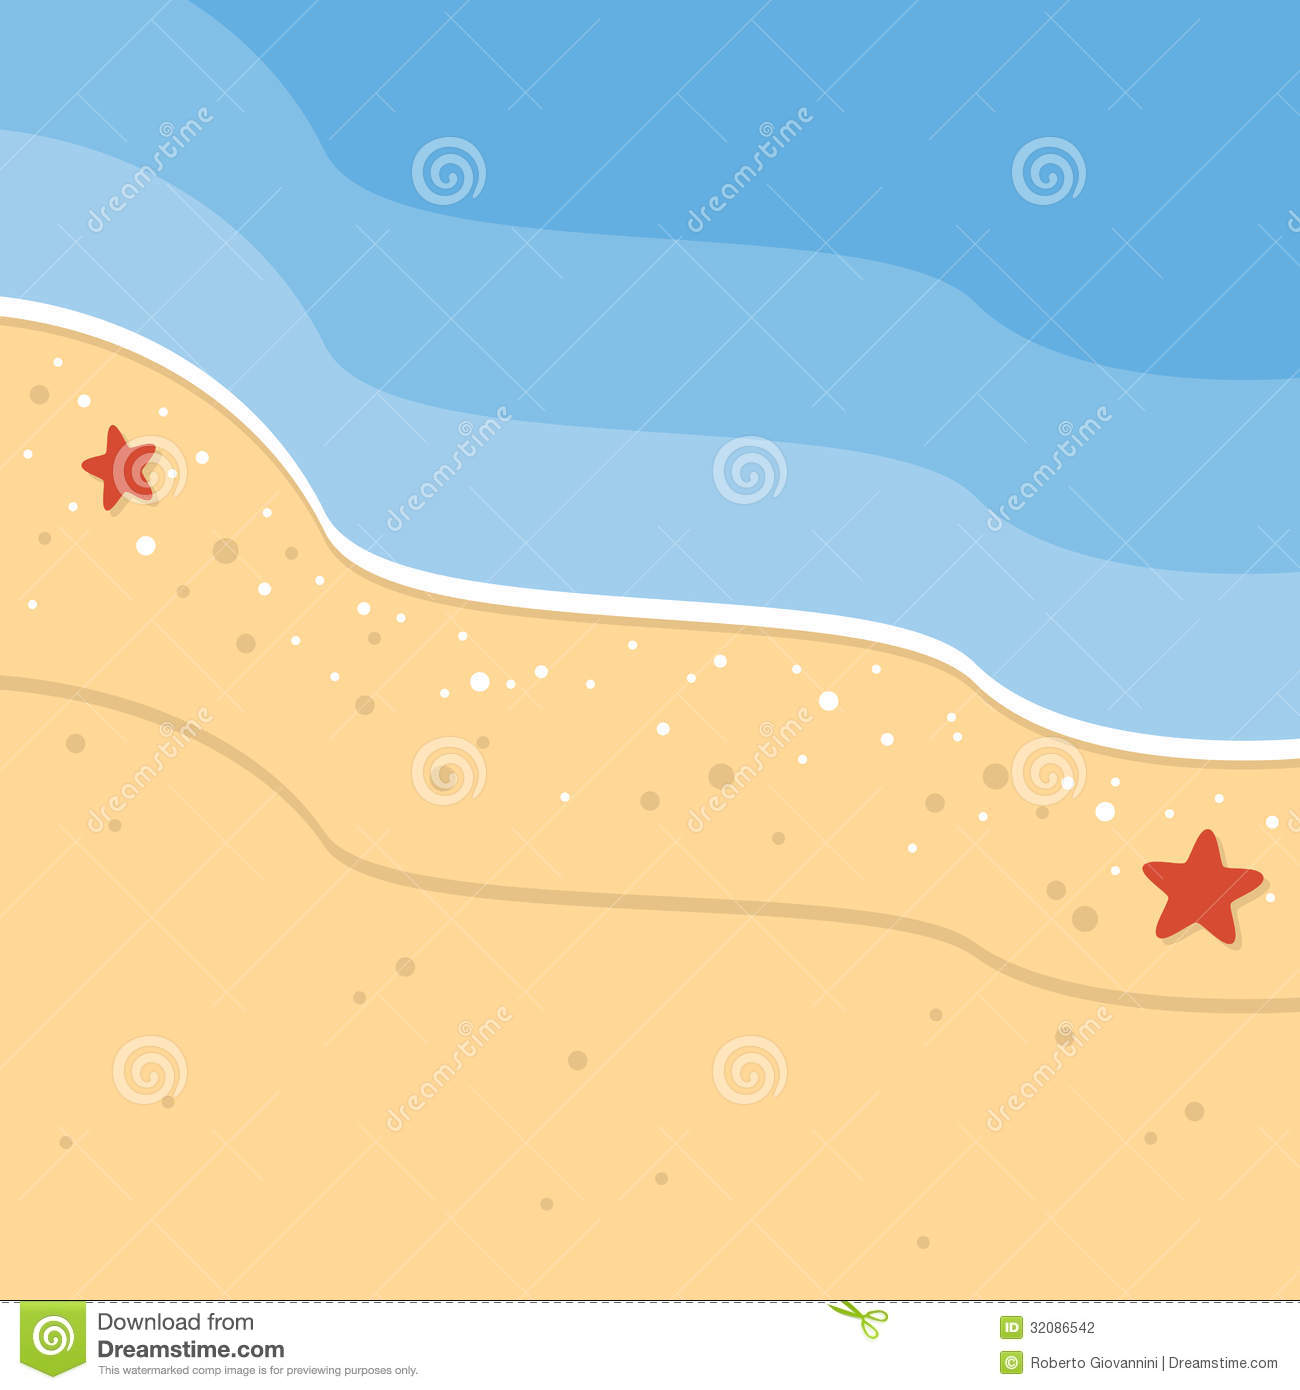 Sand Beach Tropical Seashore Background With Starfish And The Sea